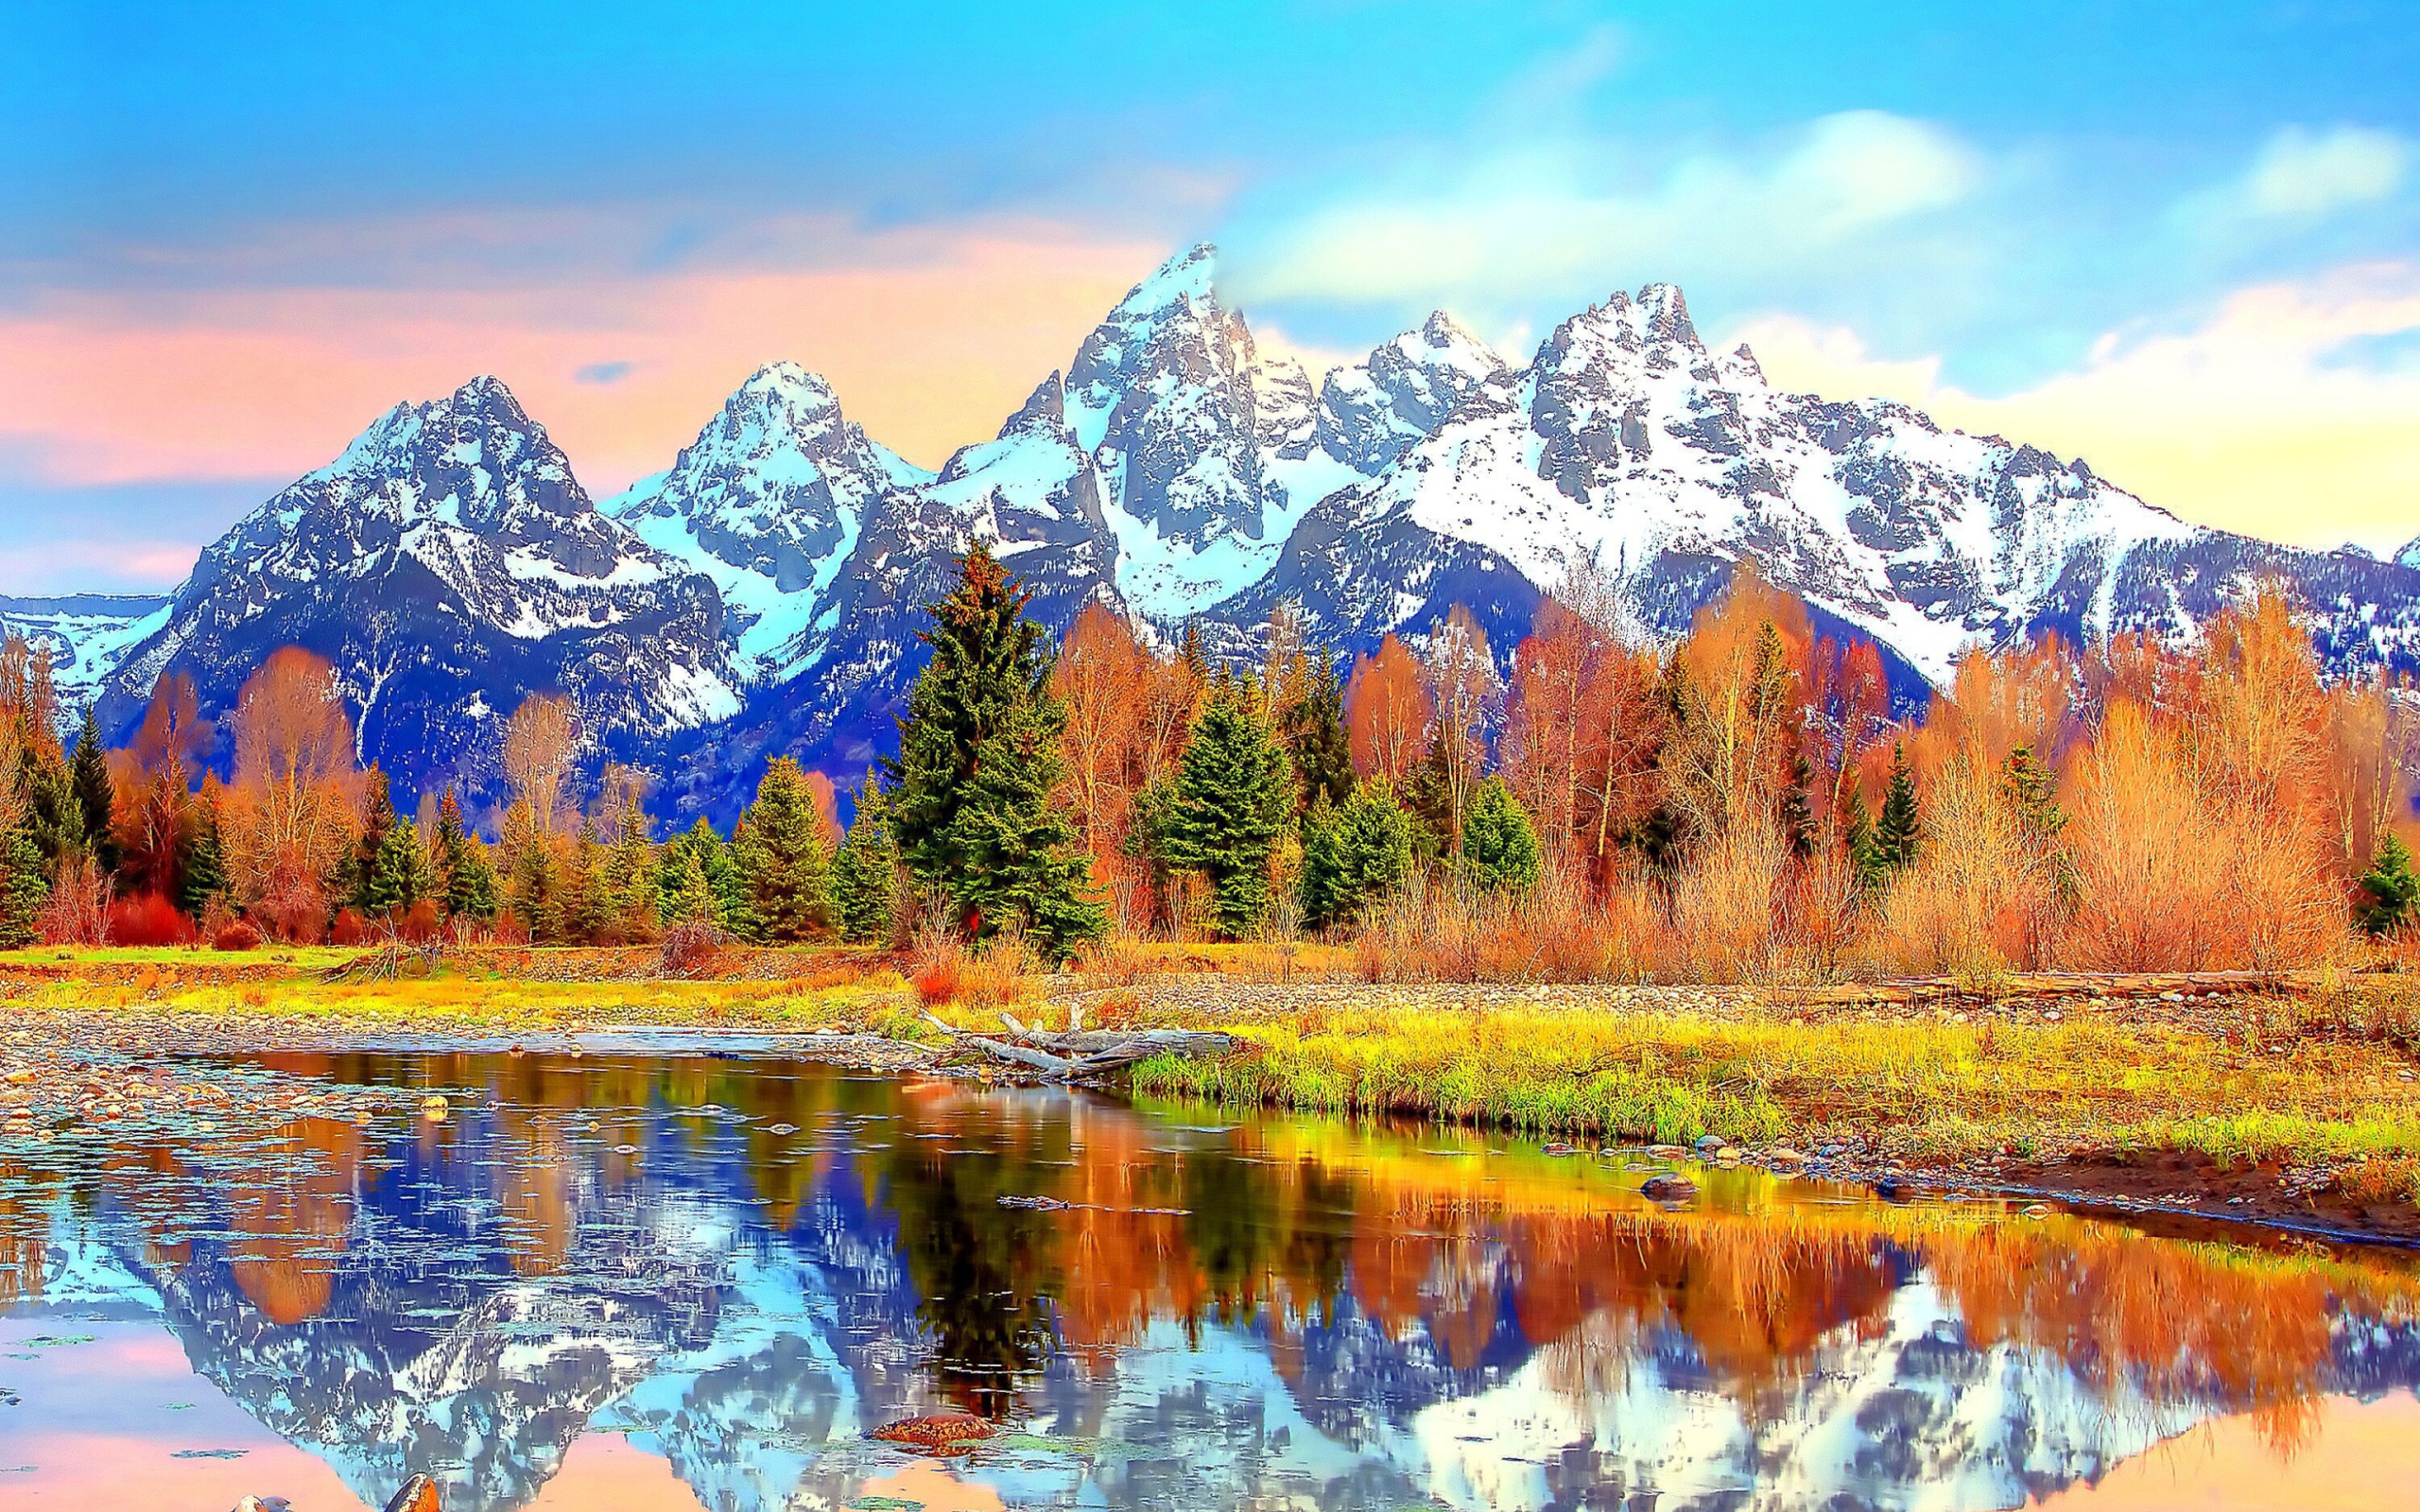 Lake with Amazing Mountains in Alpine Region wallpaper 2560x1600